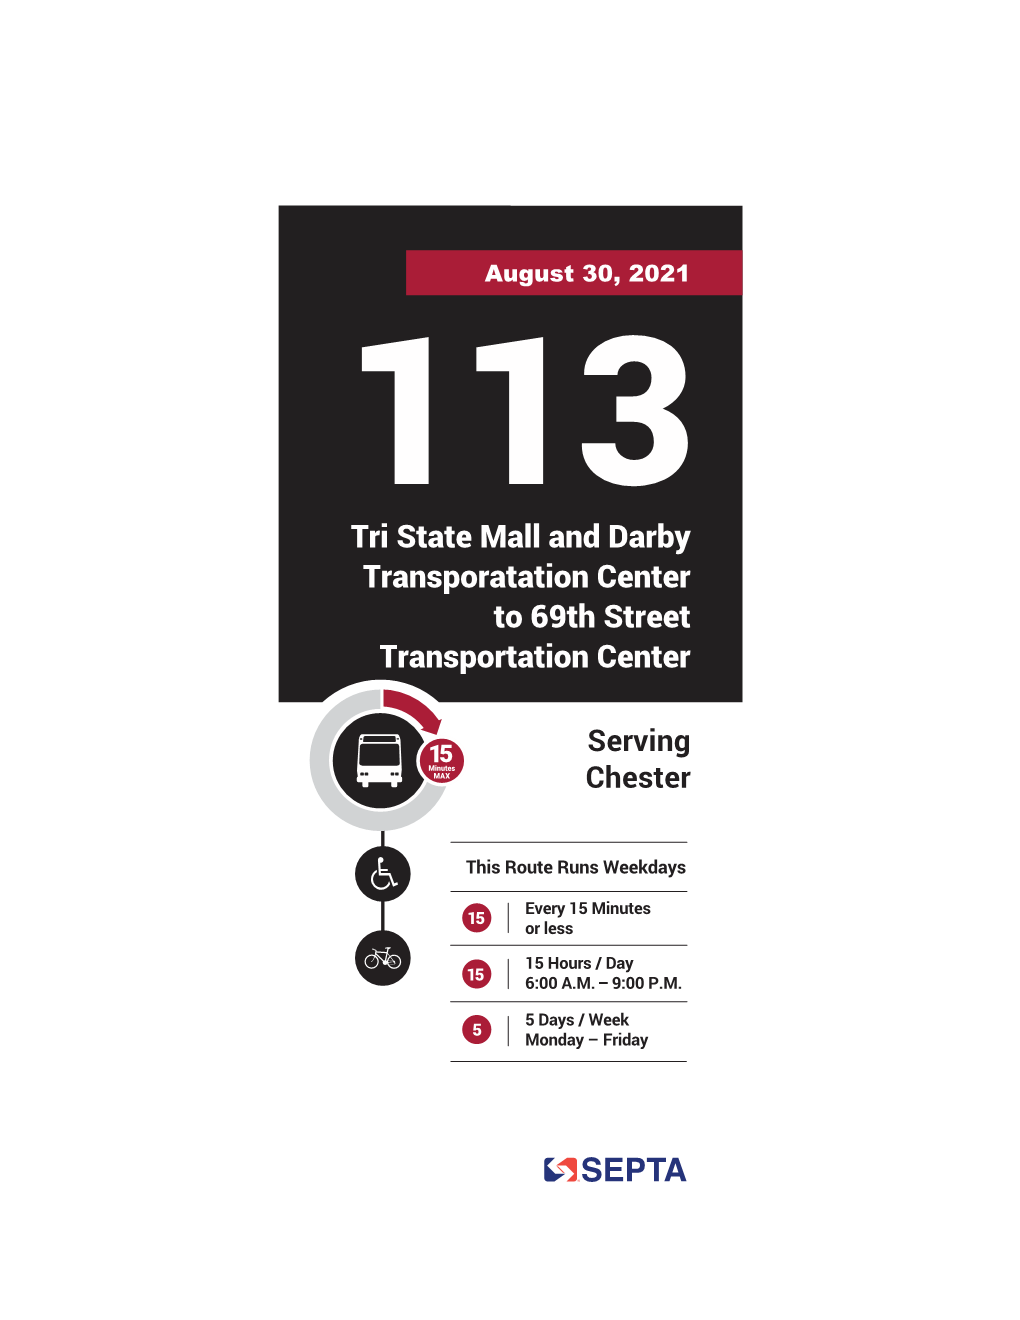 Tri State Mall and Darby Transporatation Center to 69Th Street Transportation Center